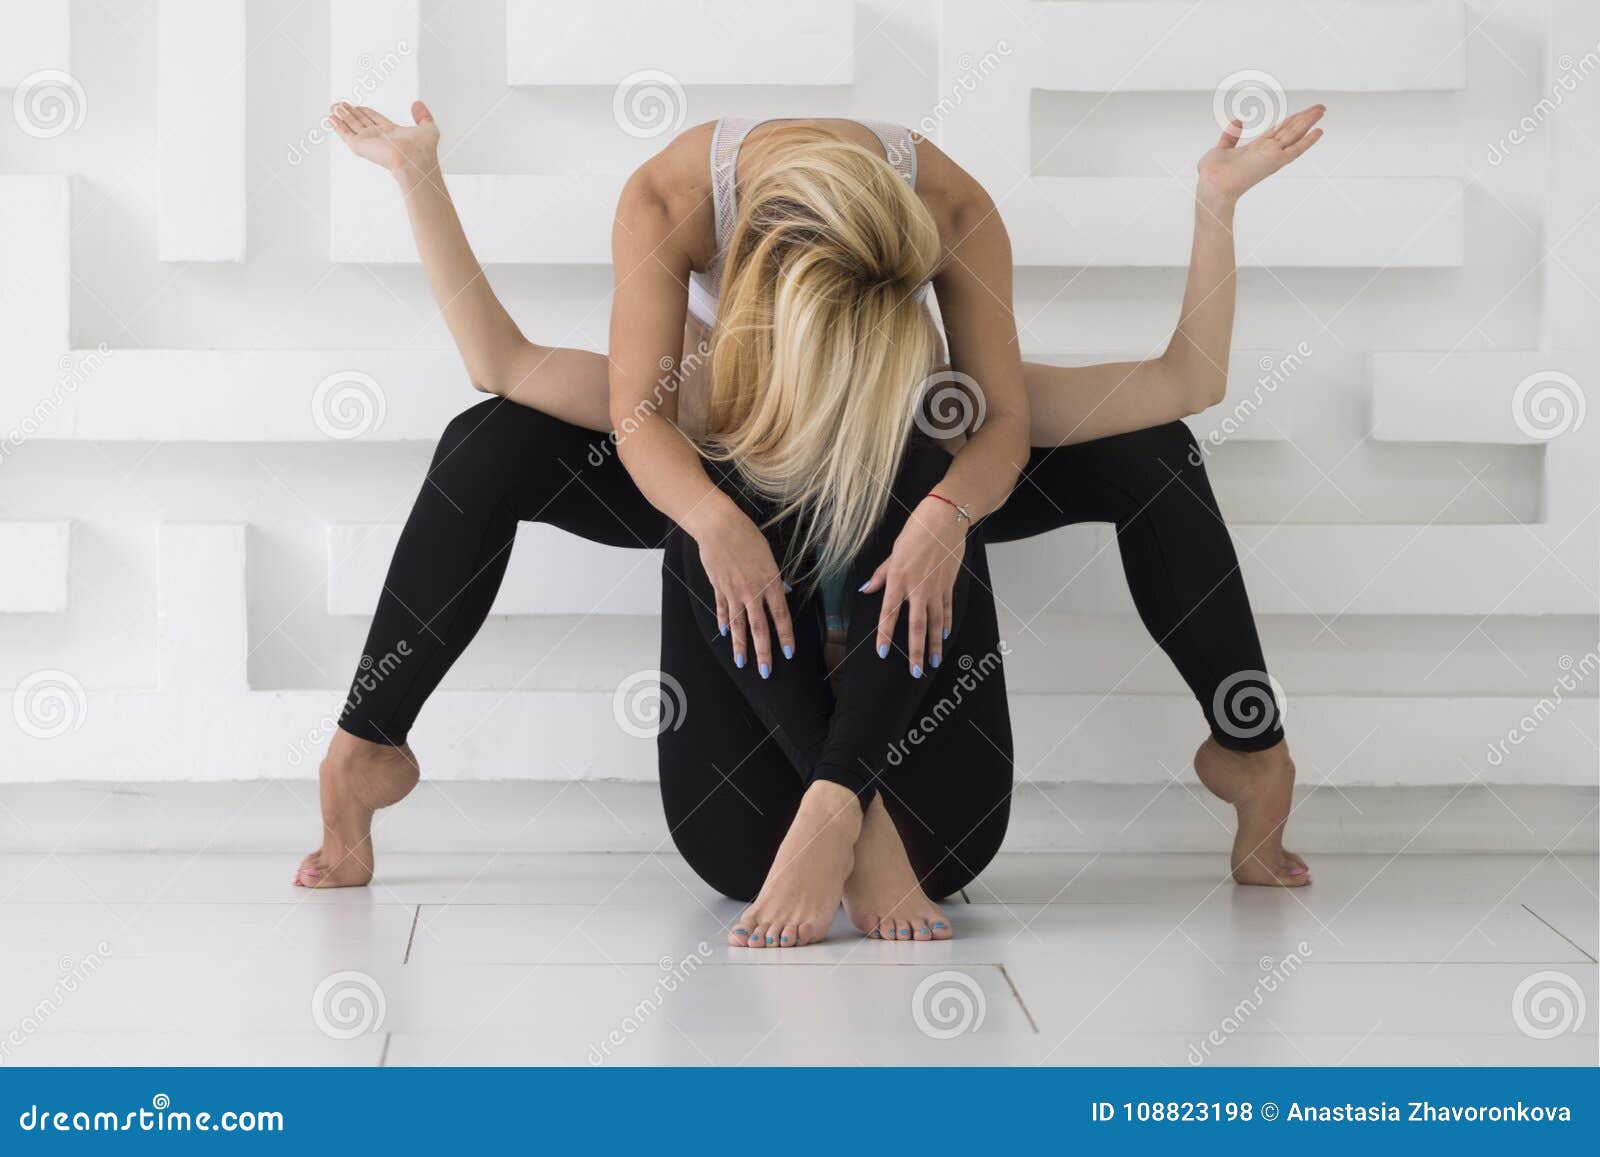 two young women practicing acro yoga balance pose whate background studio shoot two young attractive women practicing acro yoga 108823198